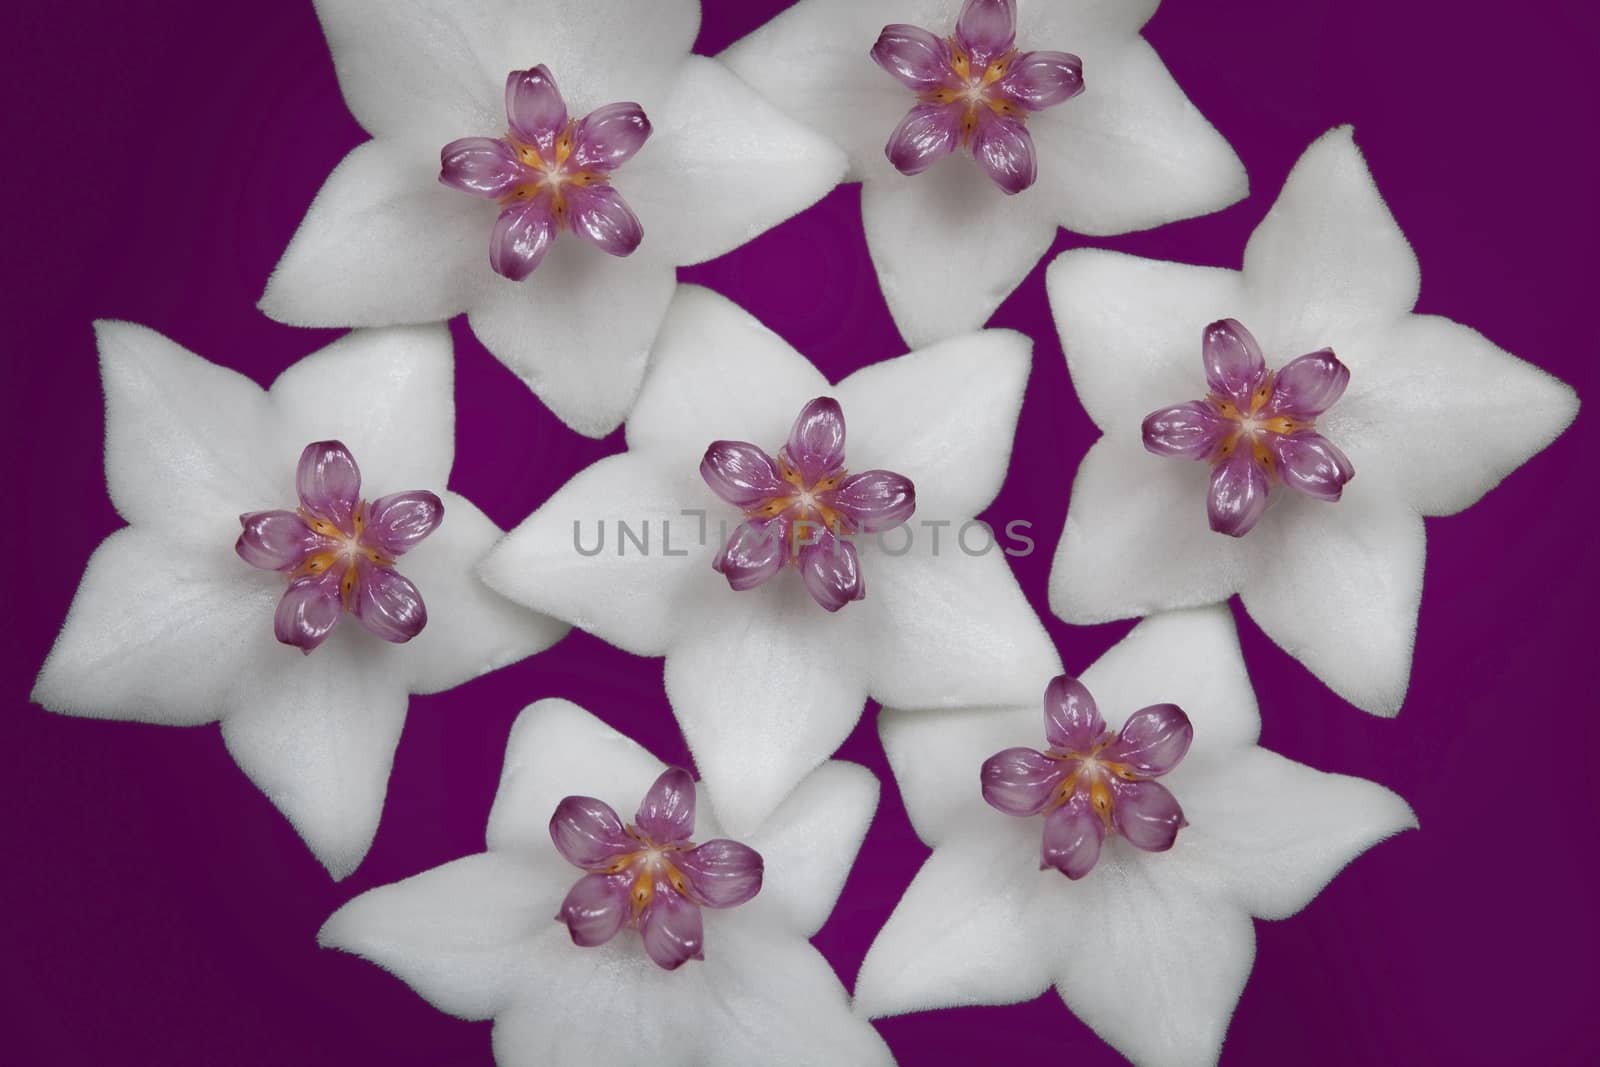 Bouquet of white flowers with a purple heart on a purple background.